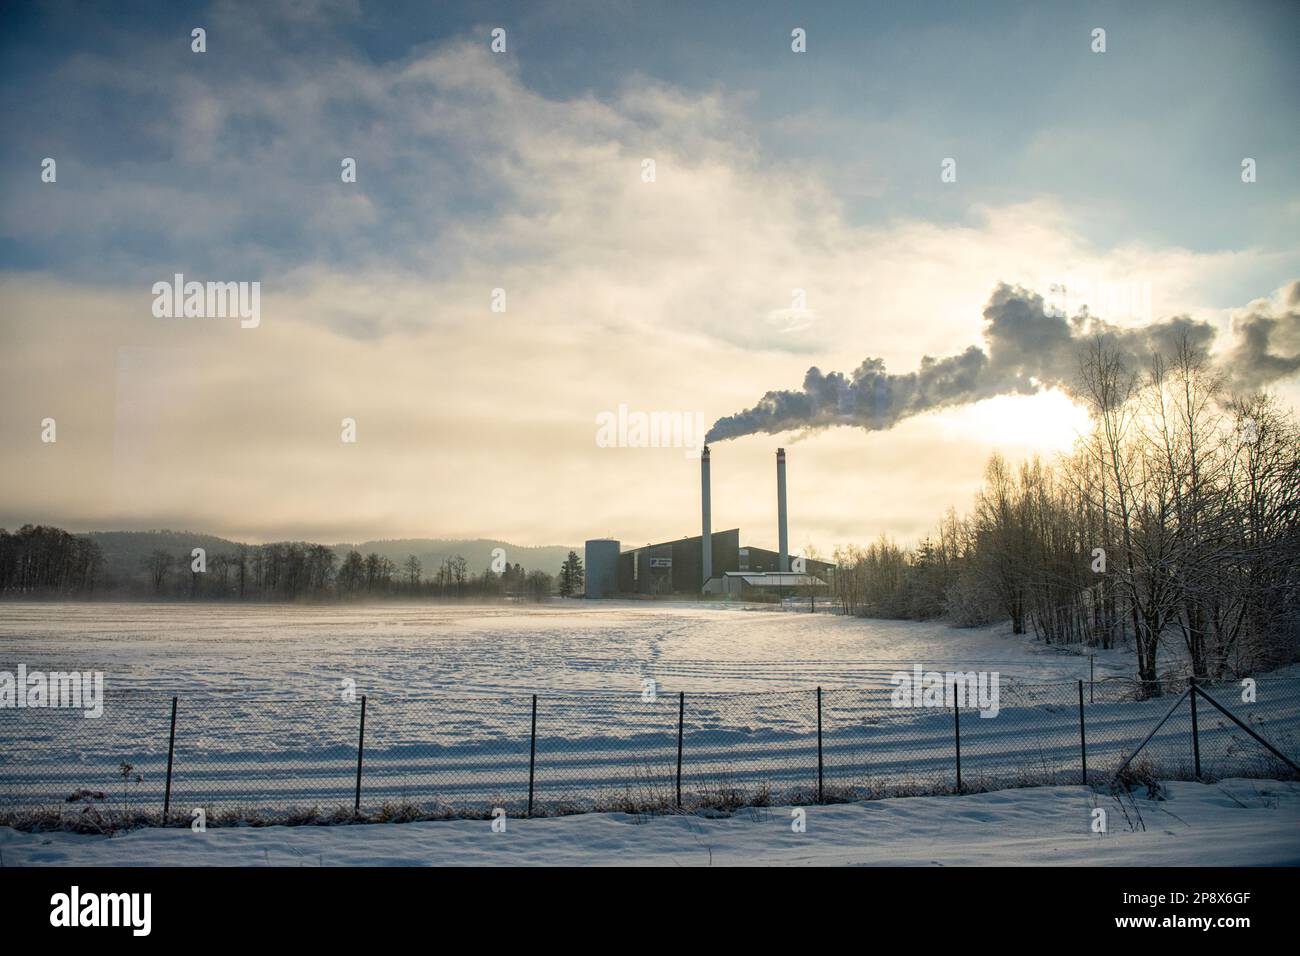 Pollution from an industrial plant in rural Norway Stock Photo